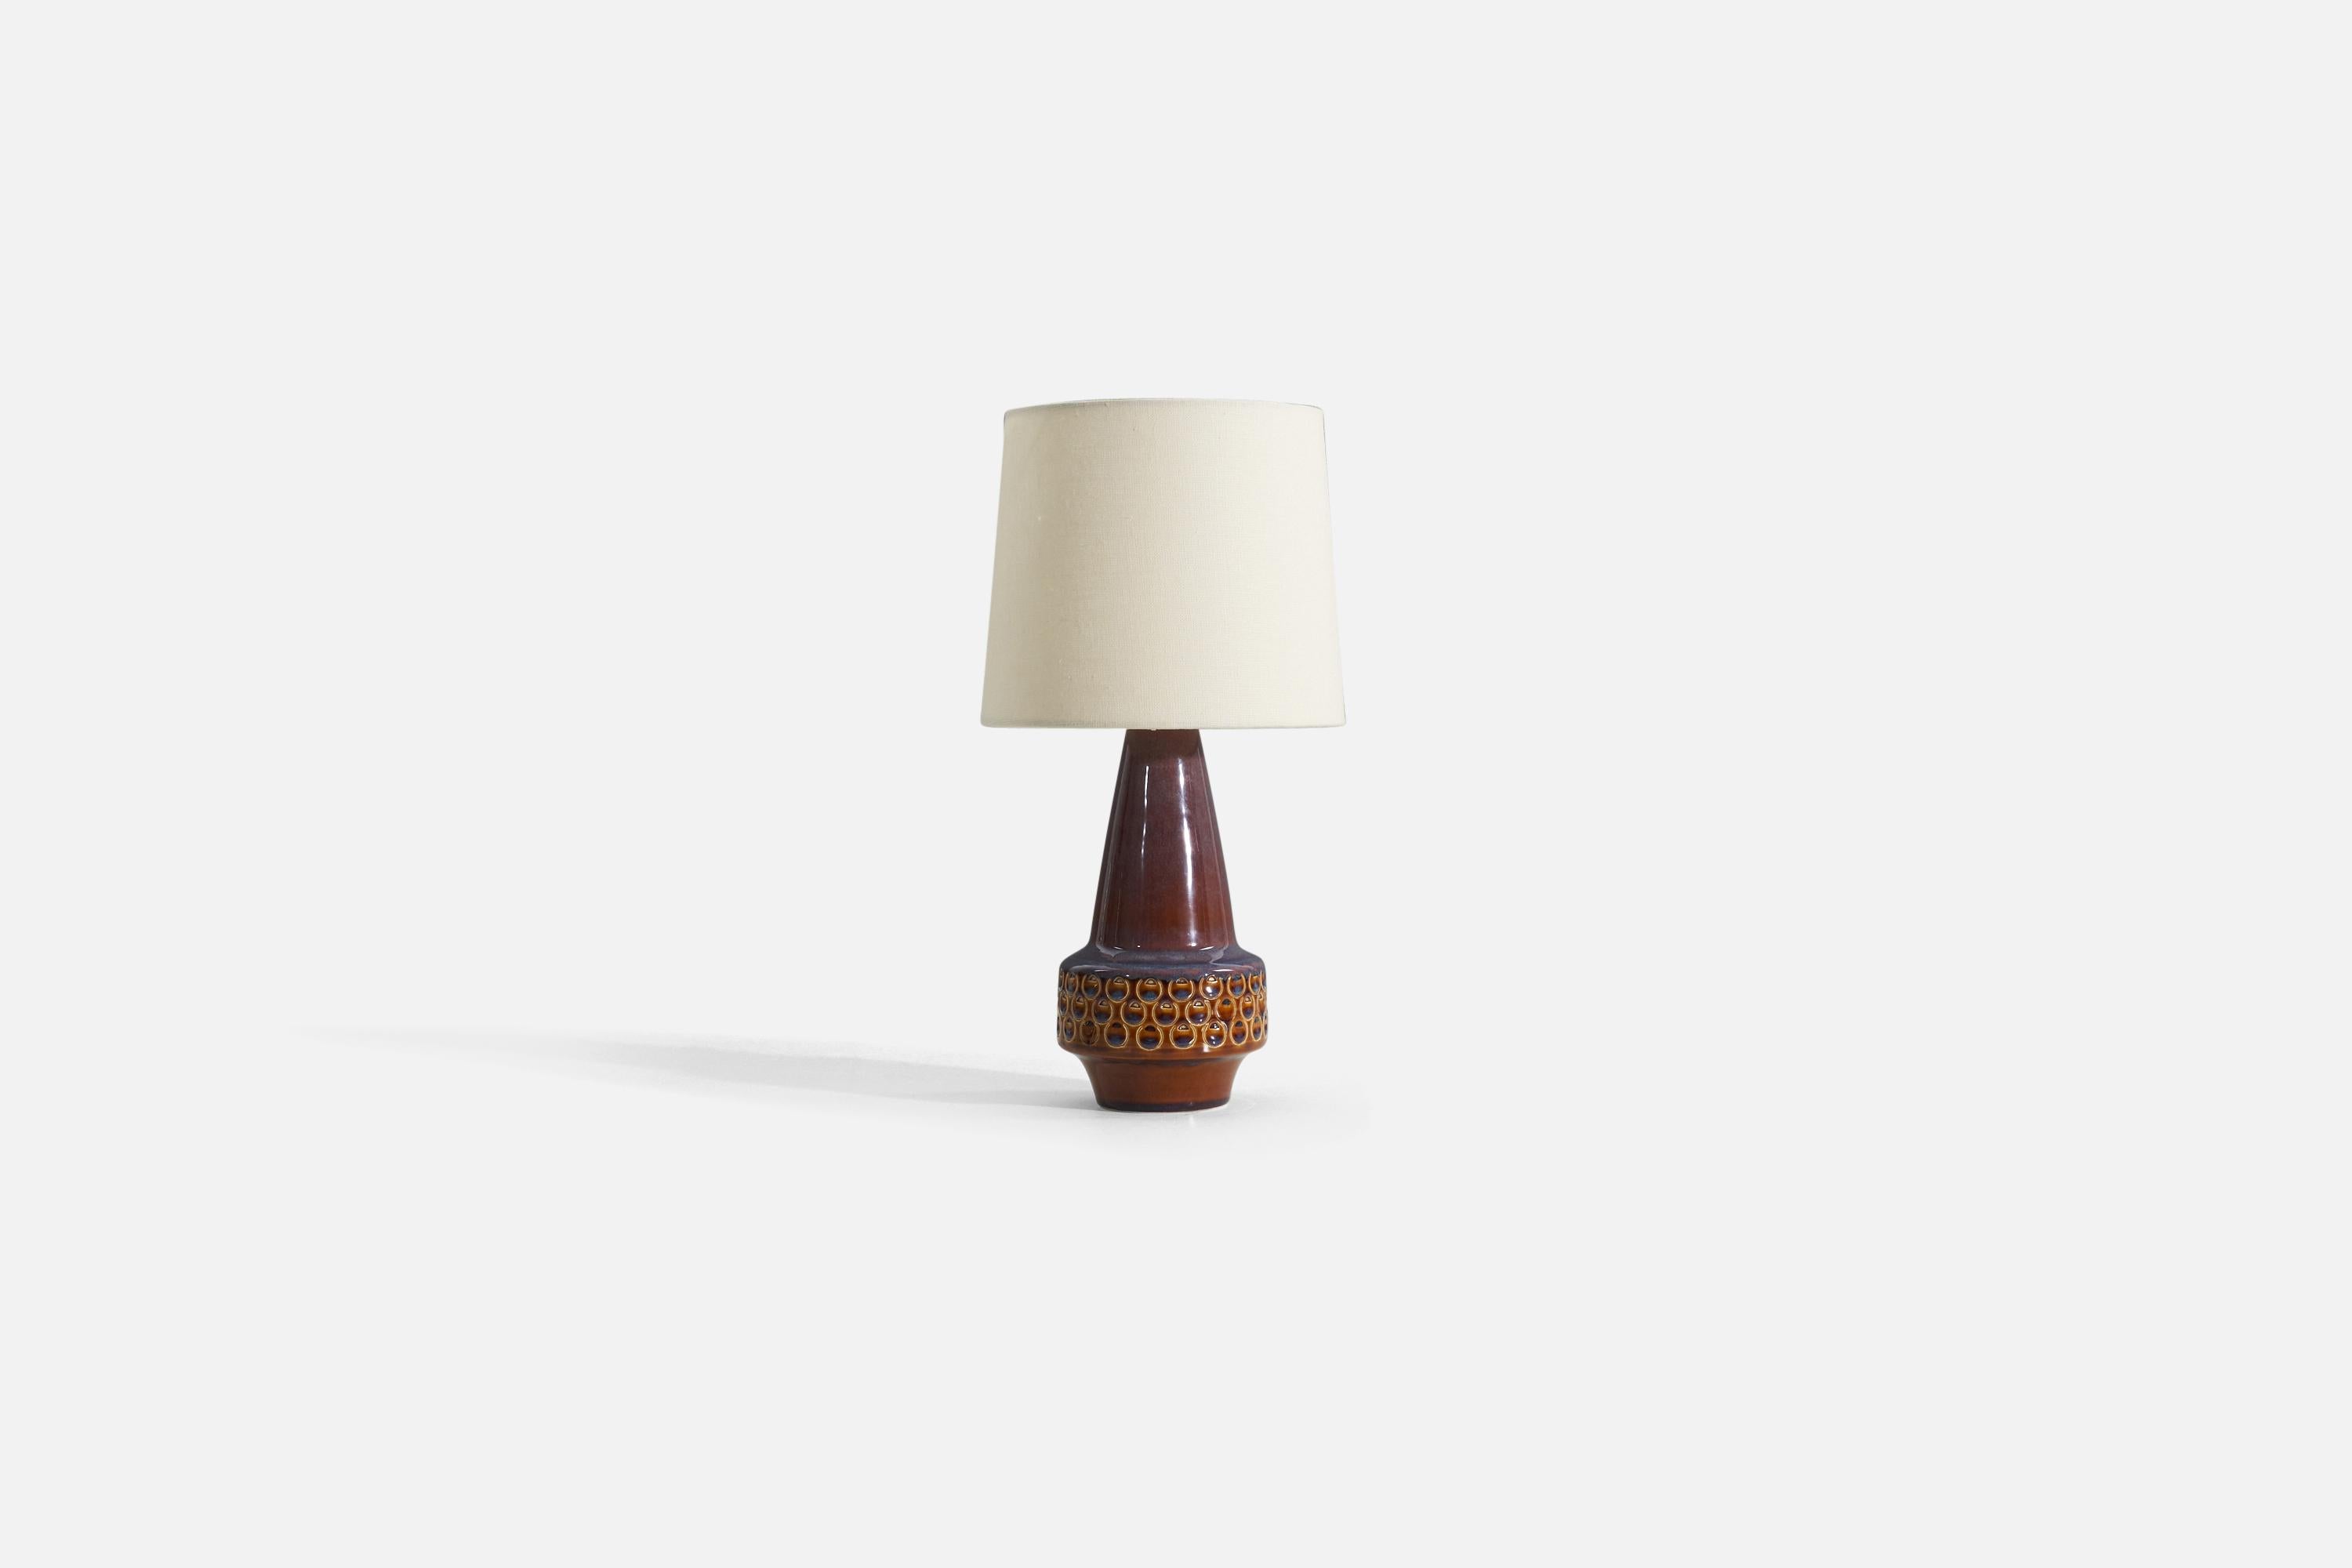 A glazed stoneware table lamp, designed and produced by Søholm Stentøj, Denmark, 1960s.

Measurements listed are of lamp. Sold without lampshade.

For reference:

Shade : 7 x 8 x 7
Lamp with shade : 15.5 x 8 x 8.